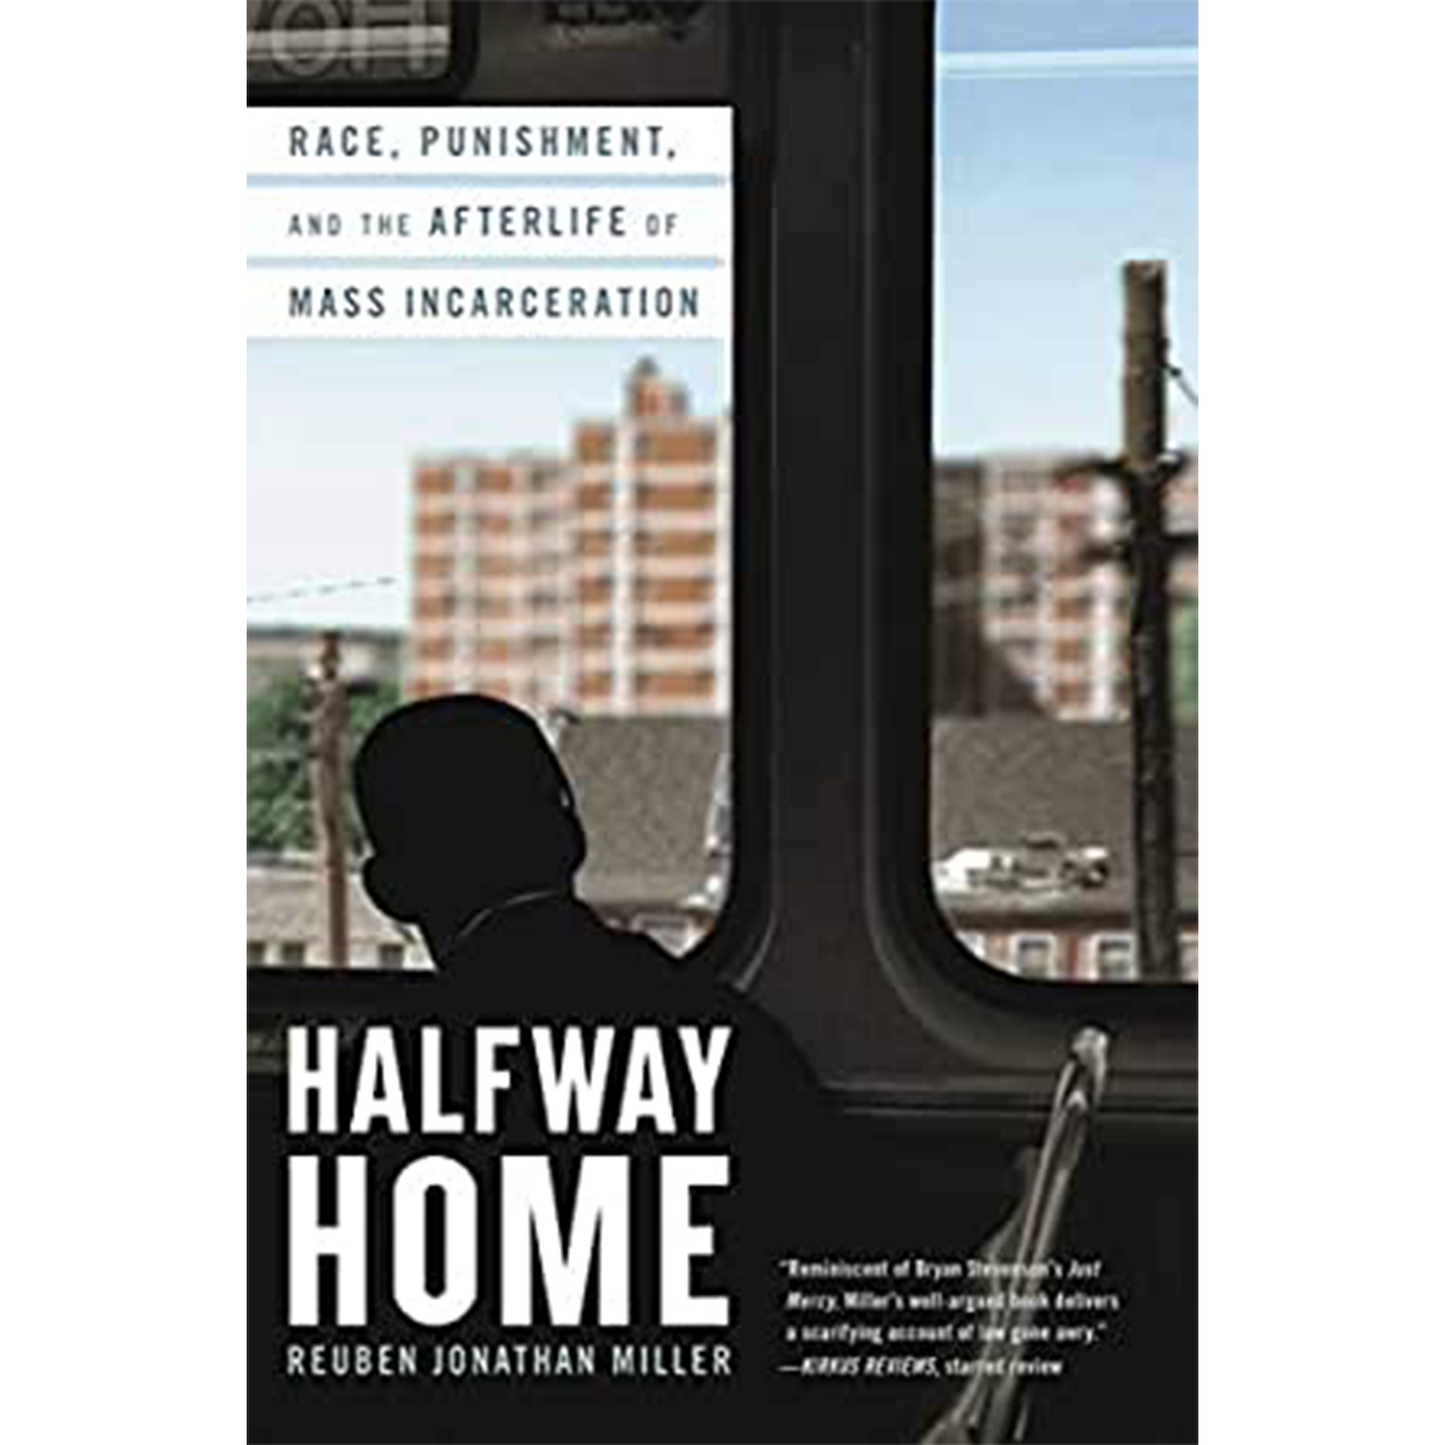 Halfway Home: Race, Punishment, and the Afterlife of Mass Incarceration (Hardcover)